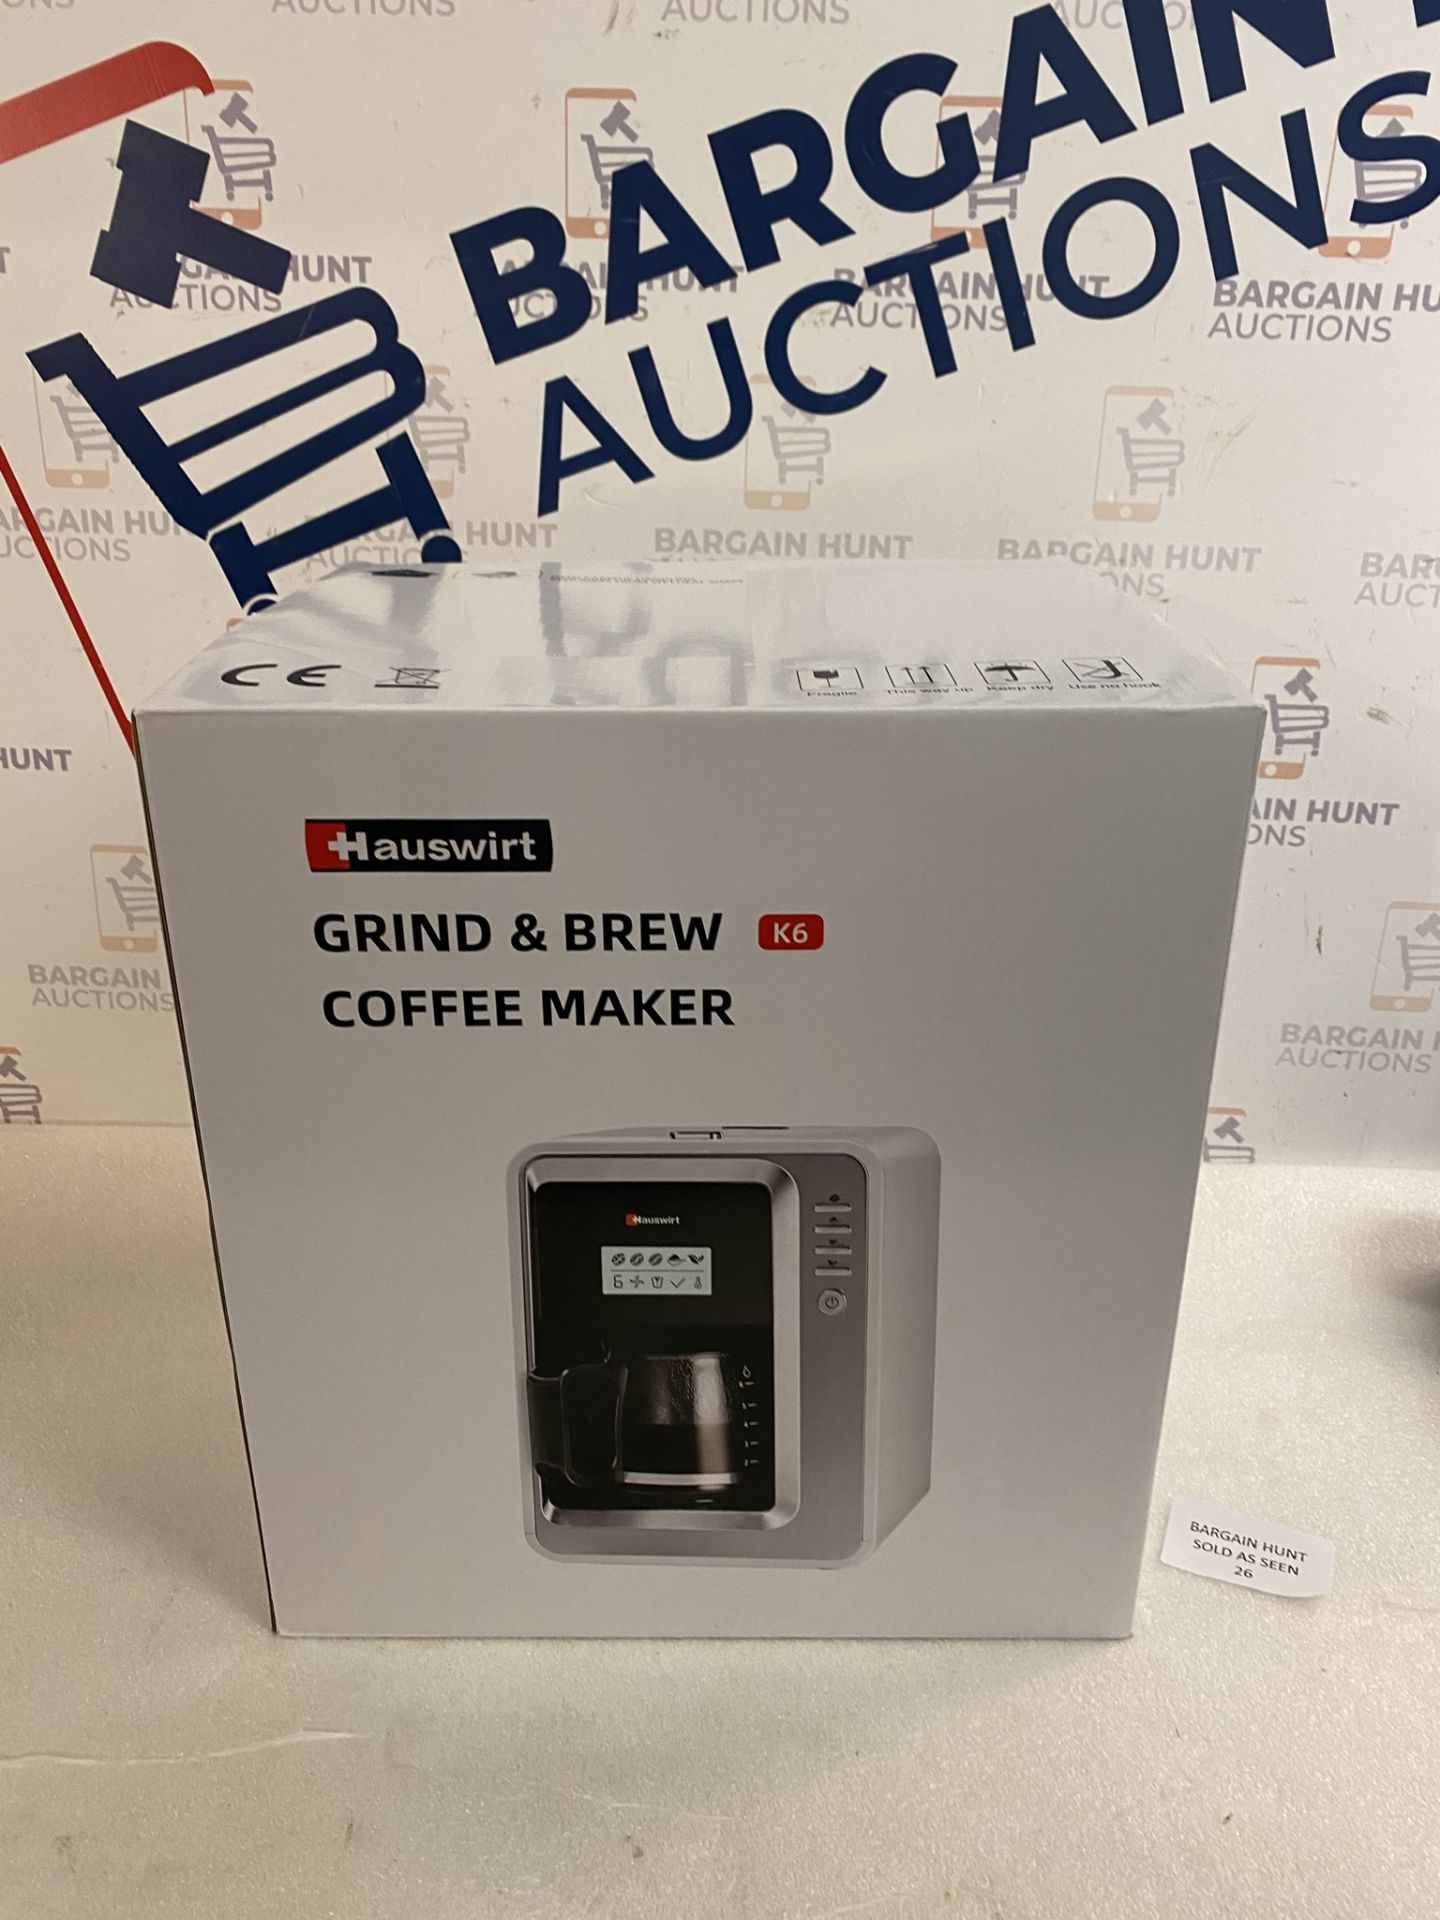 Hauswirt Grind & Brew Bean to Cup Coffee Machine RRP £119.99 - Image 2 of 2